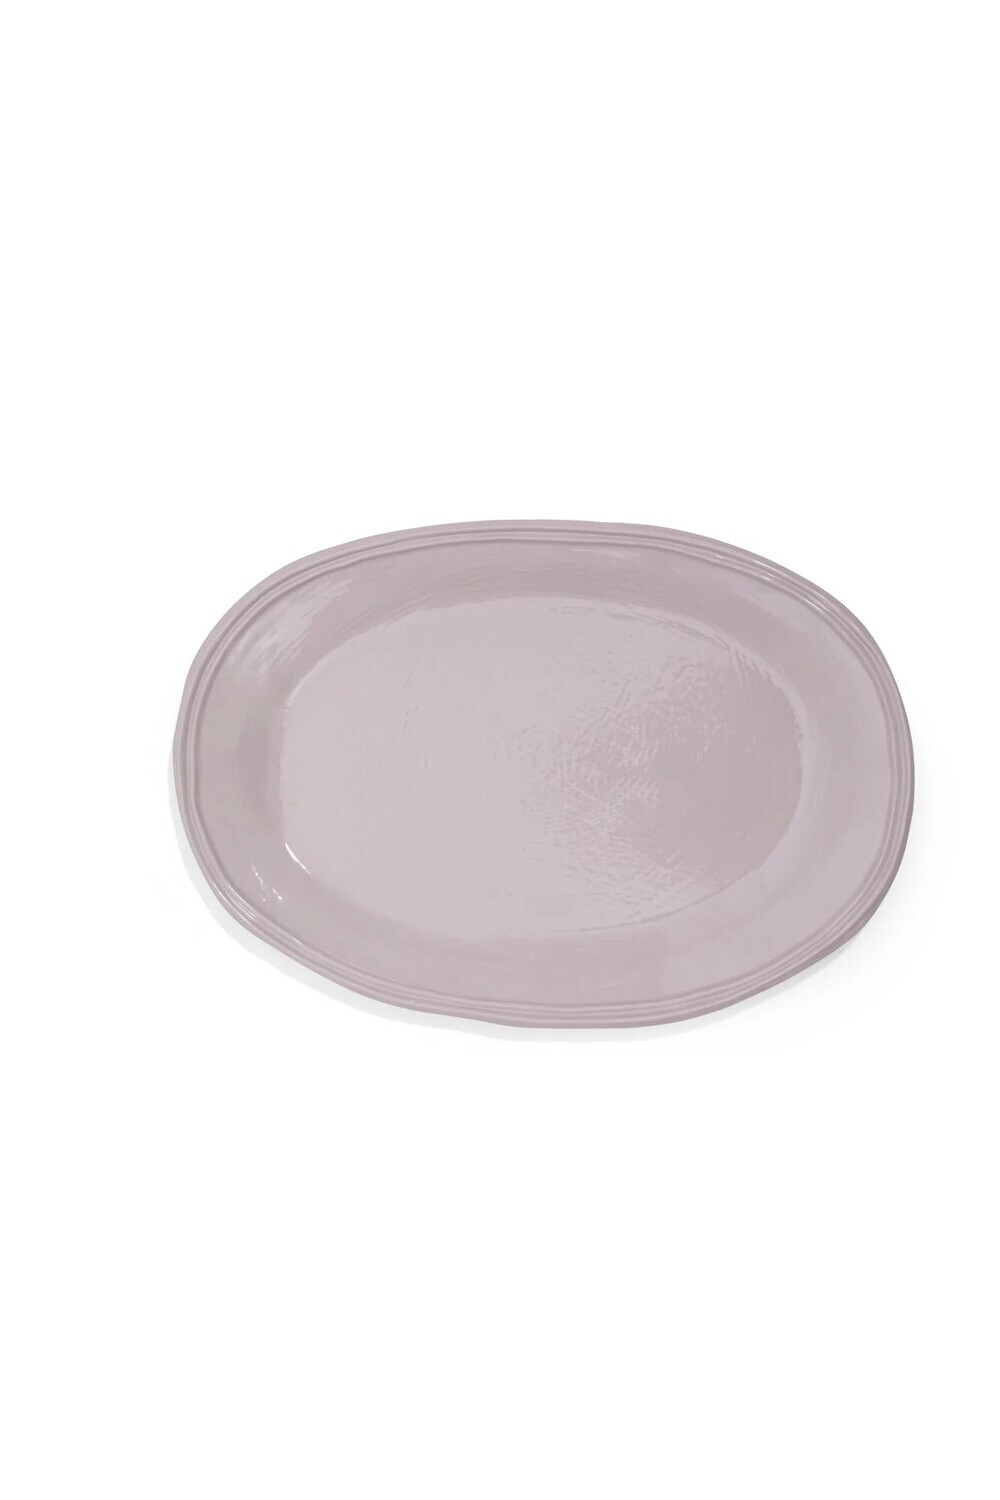 Double Line Oval Platter Stone 